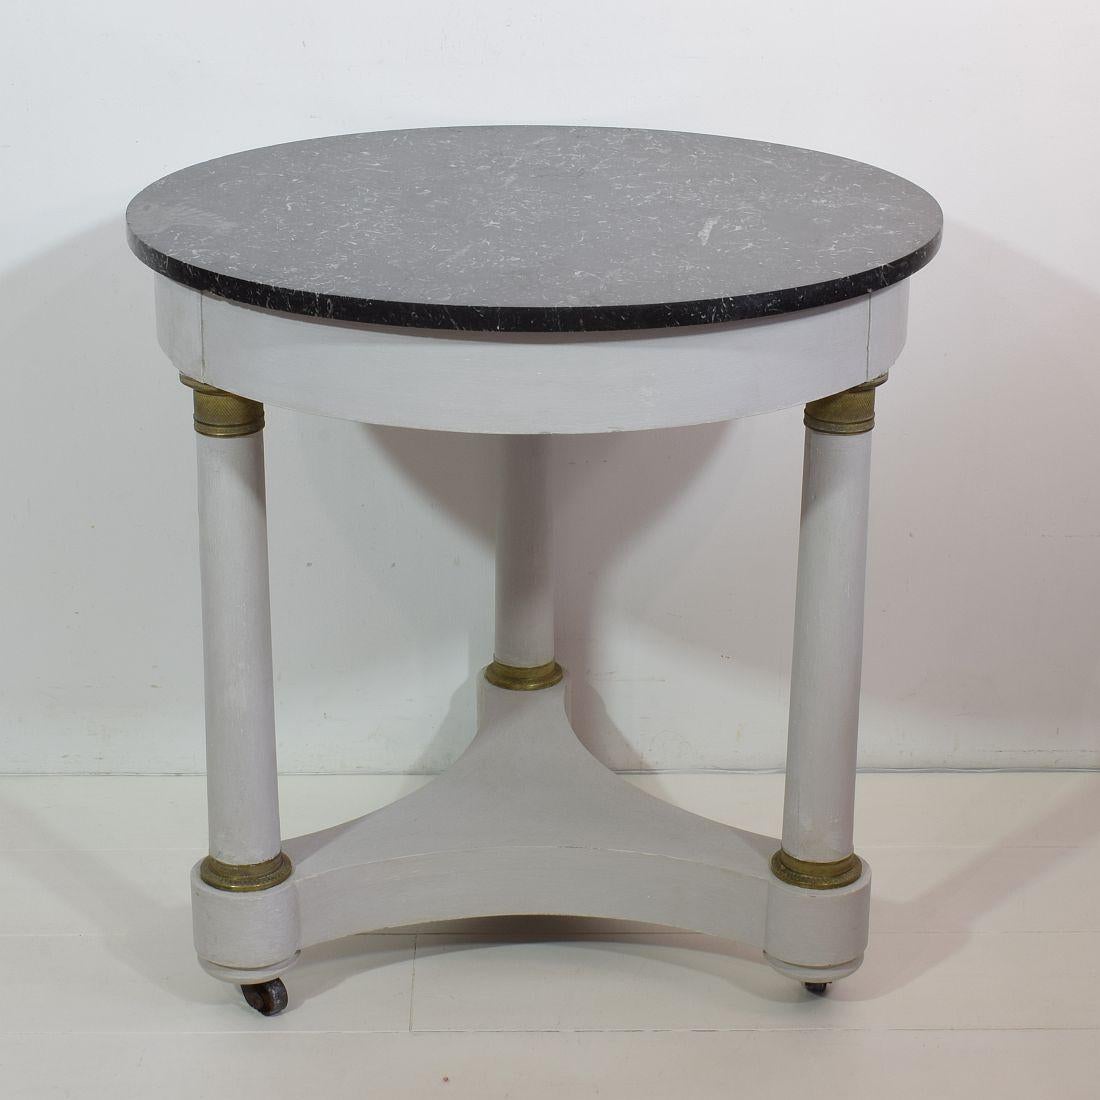 Belgian Black Marble French 19th Century Empire Style Gueridon Table with Black Marble Top